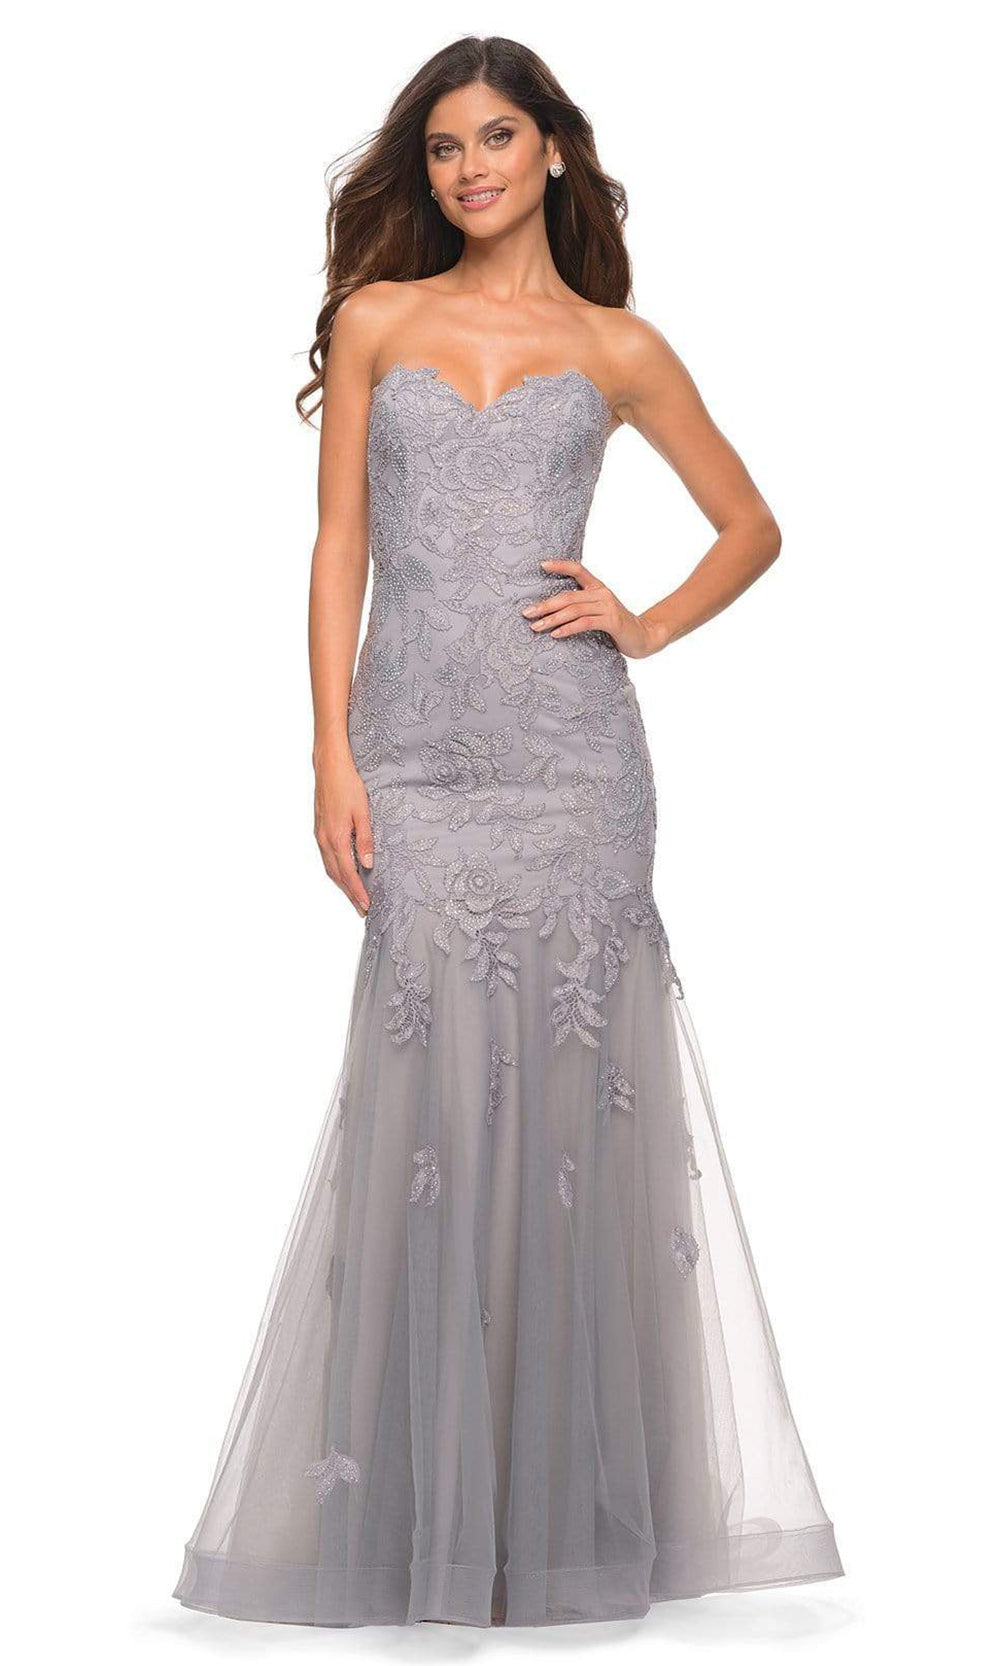 La Femme - 30717 Strapless Lace Appliqued Gown In Silver